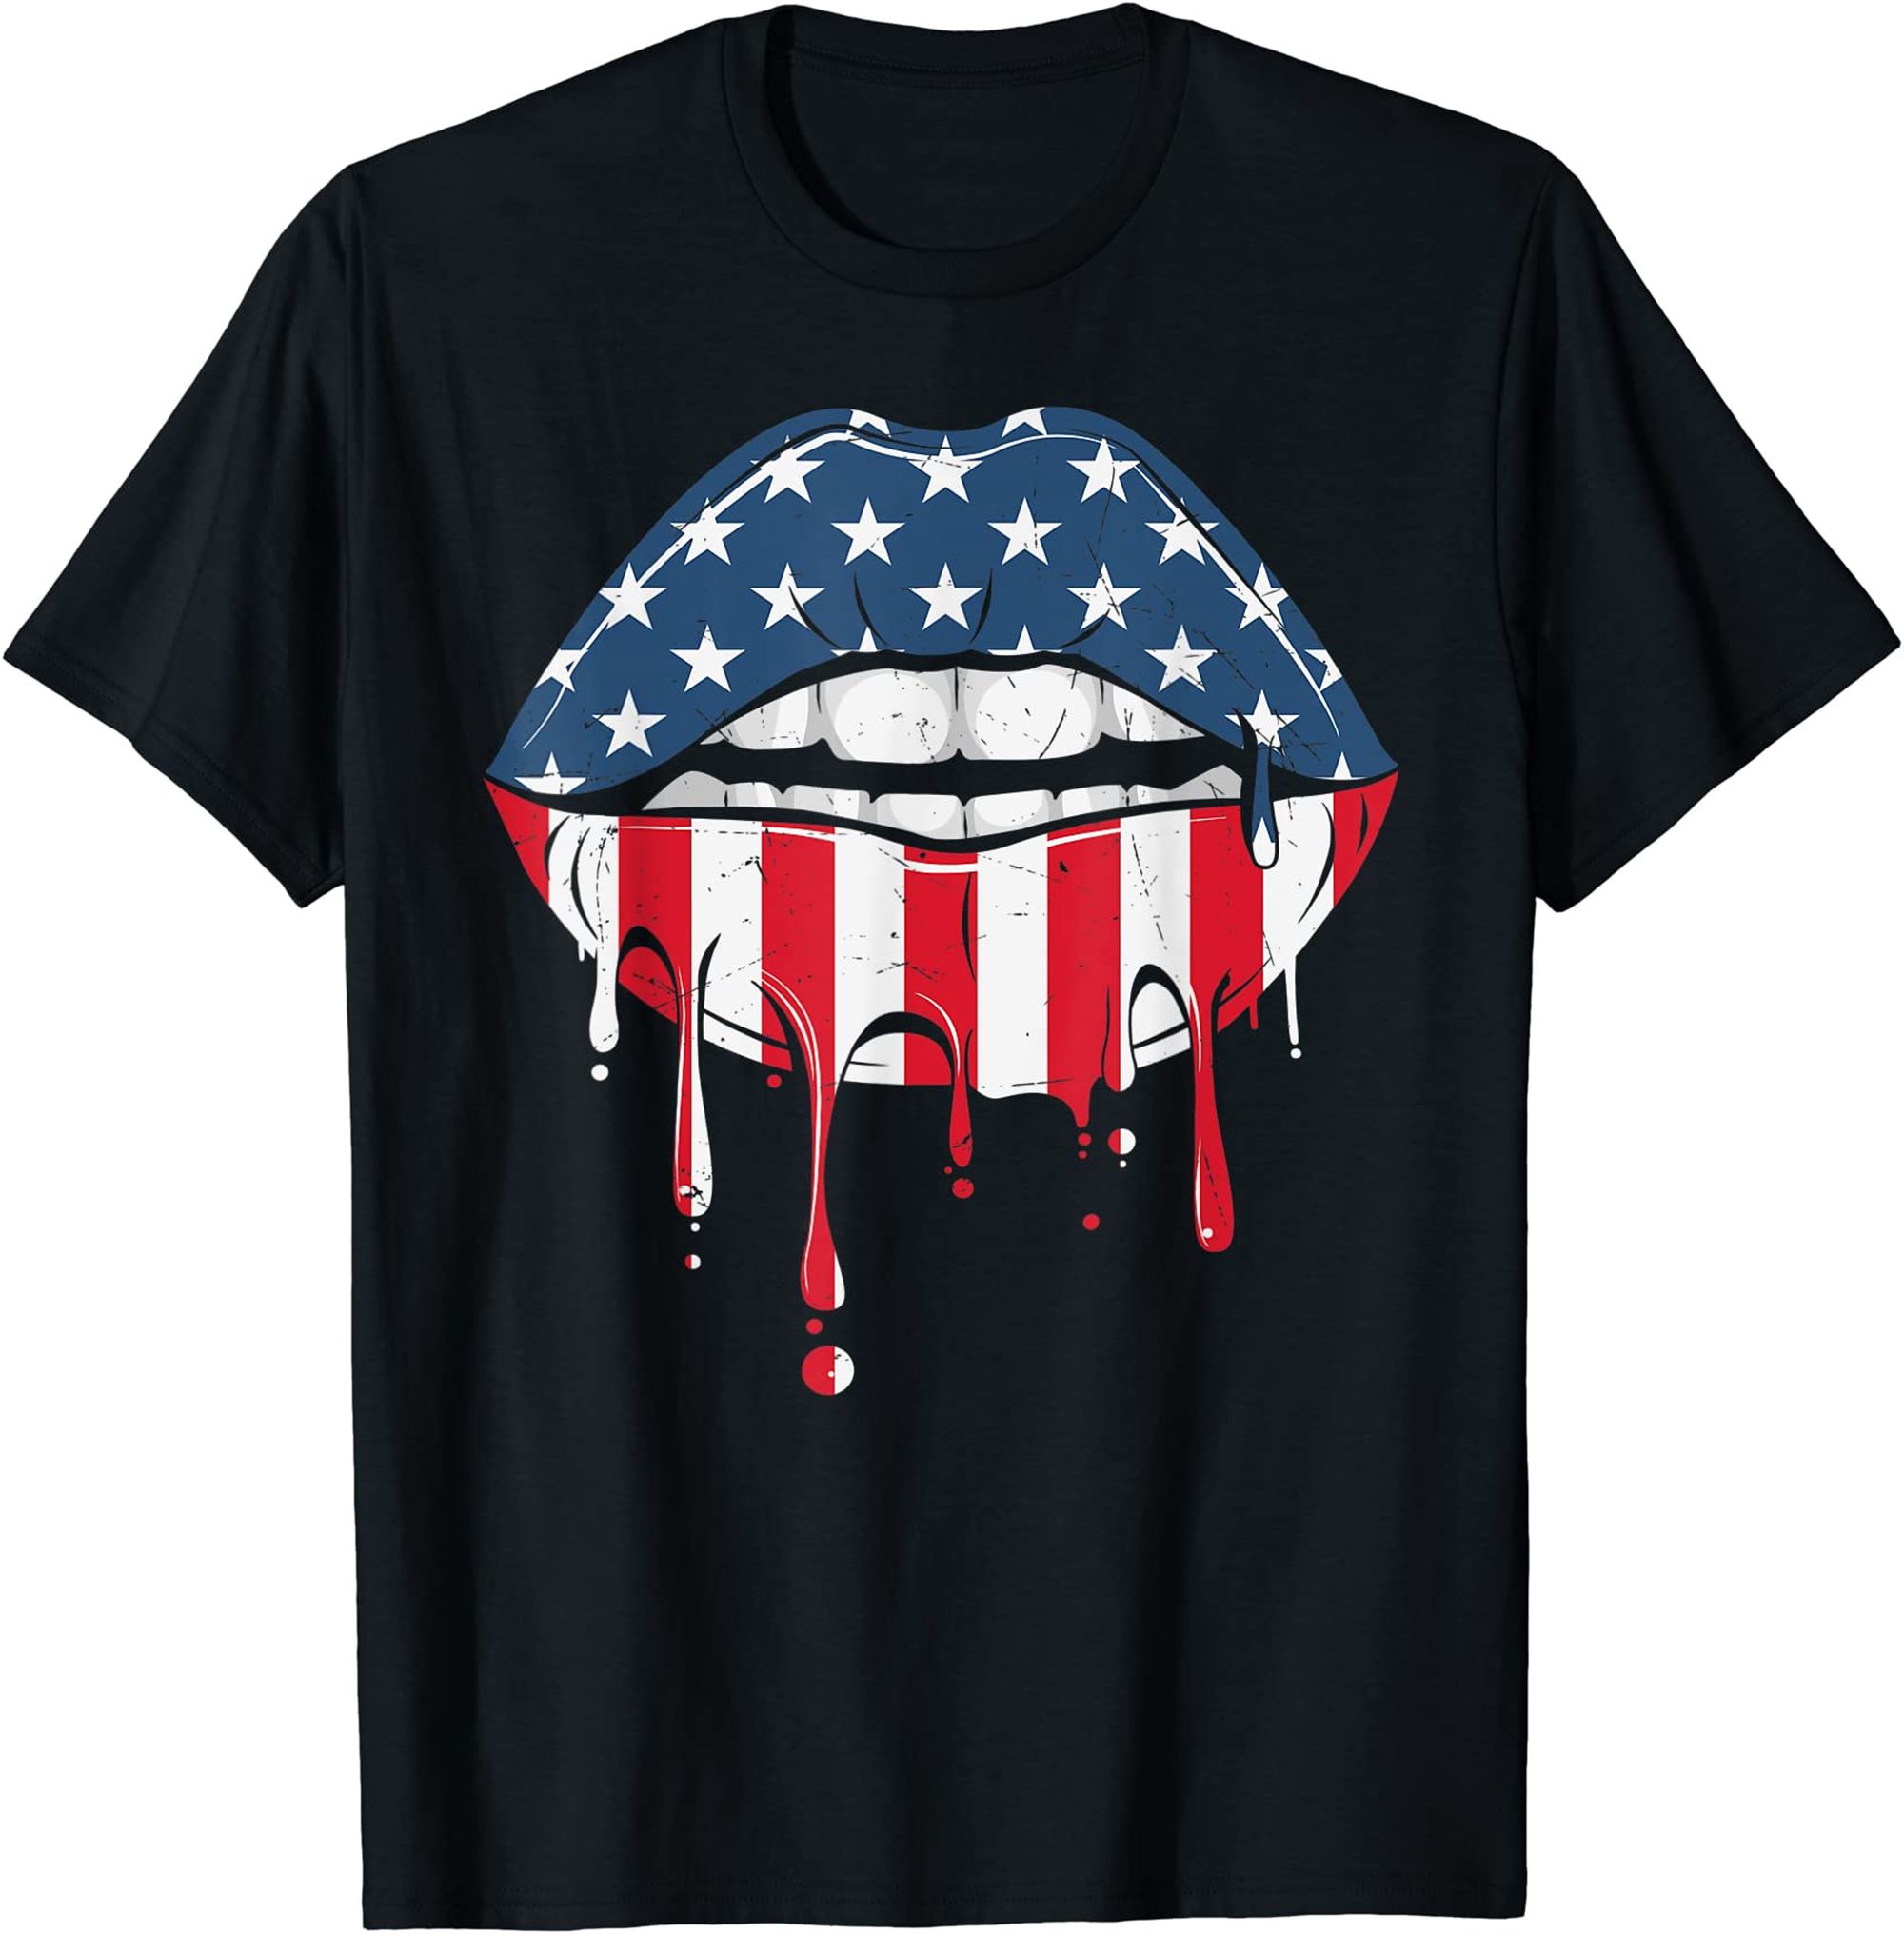 4th Of July Patriotic Hot Lips American Flag Grunge Vintage T-shirt Full Size Up To 5xl